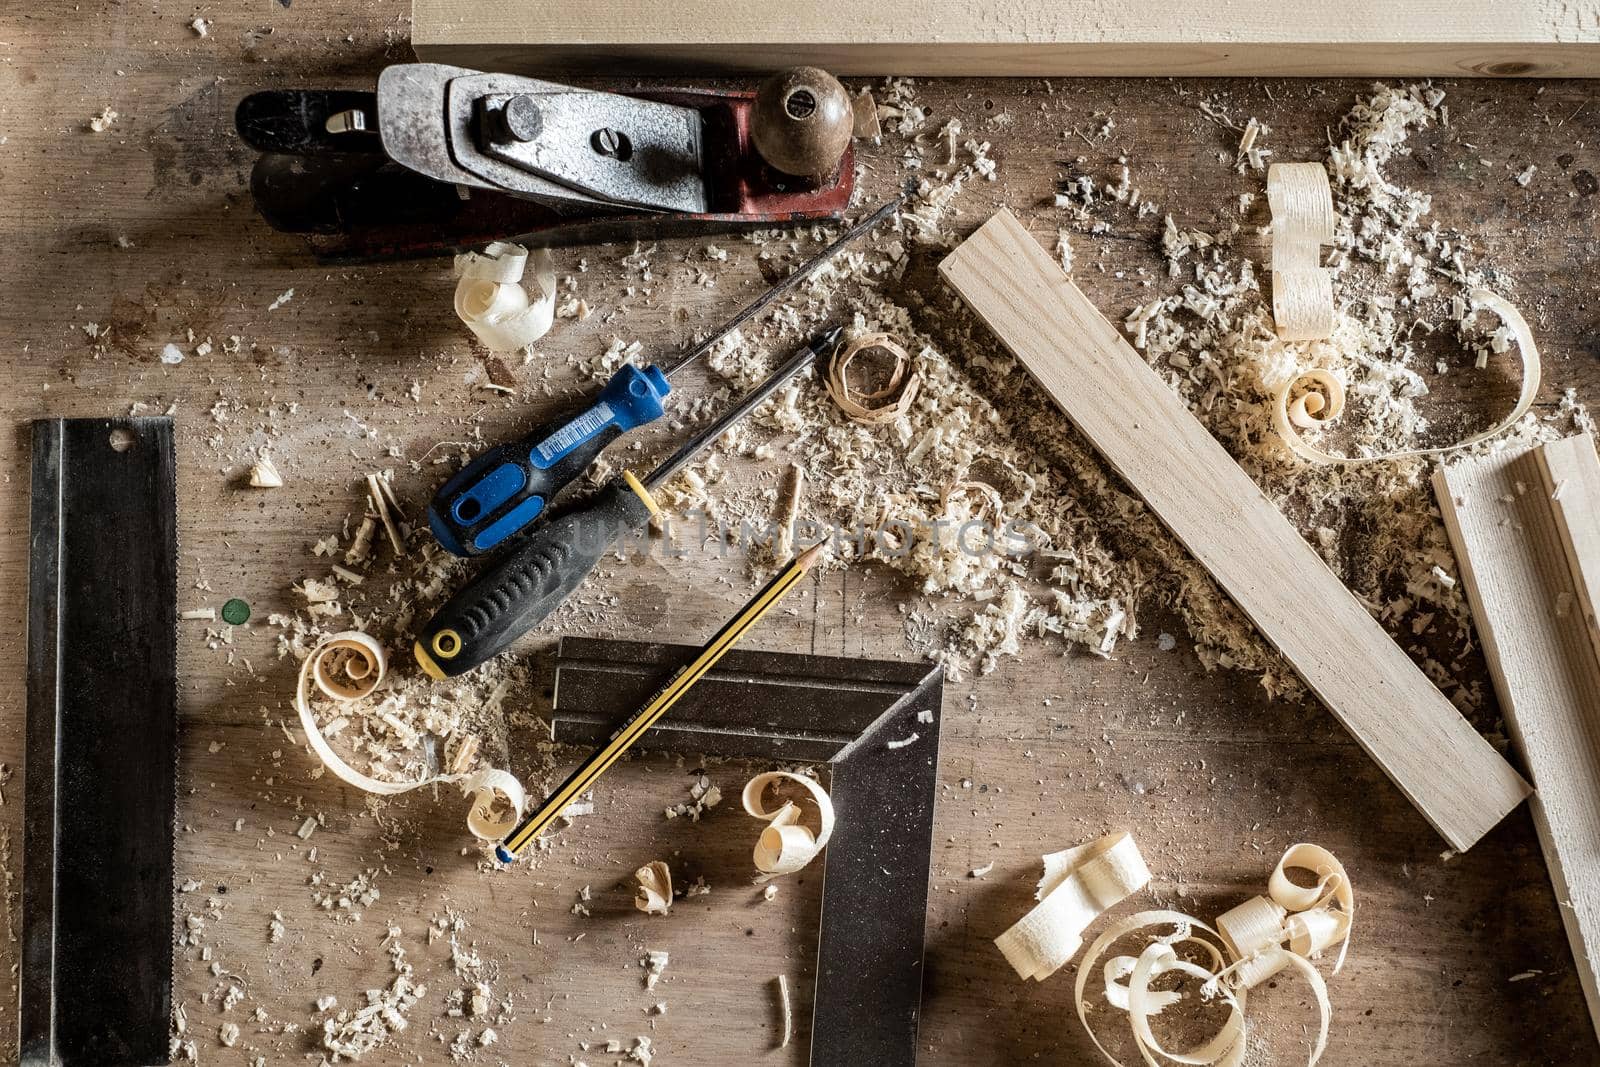 Workbench with a variety of hand tools in a woodworking or cabinetmaking workshop including chisels, screwdrivers, tape measure, pencil, ruler